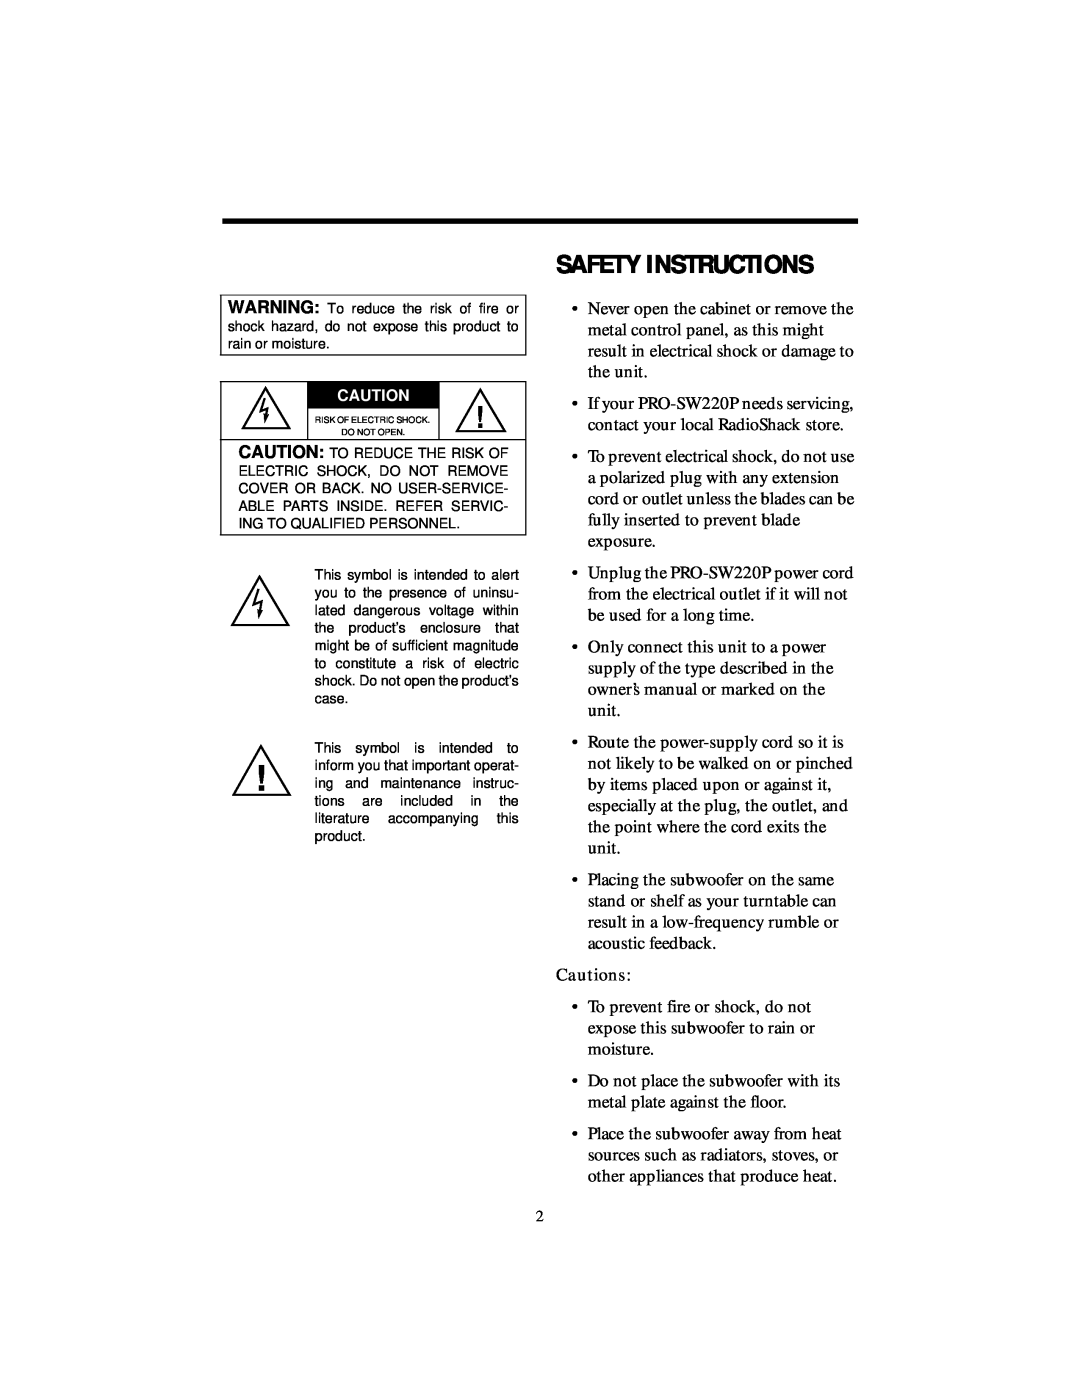 RCA PRO-SW220P manual Safety Instructions, Cautions 